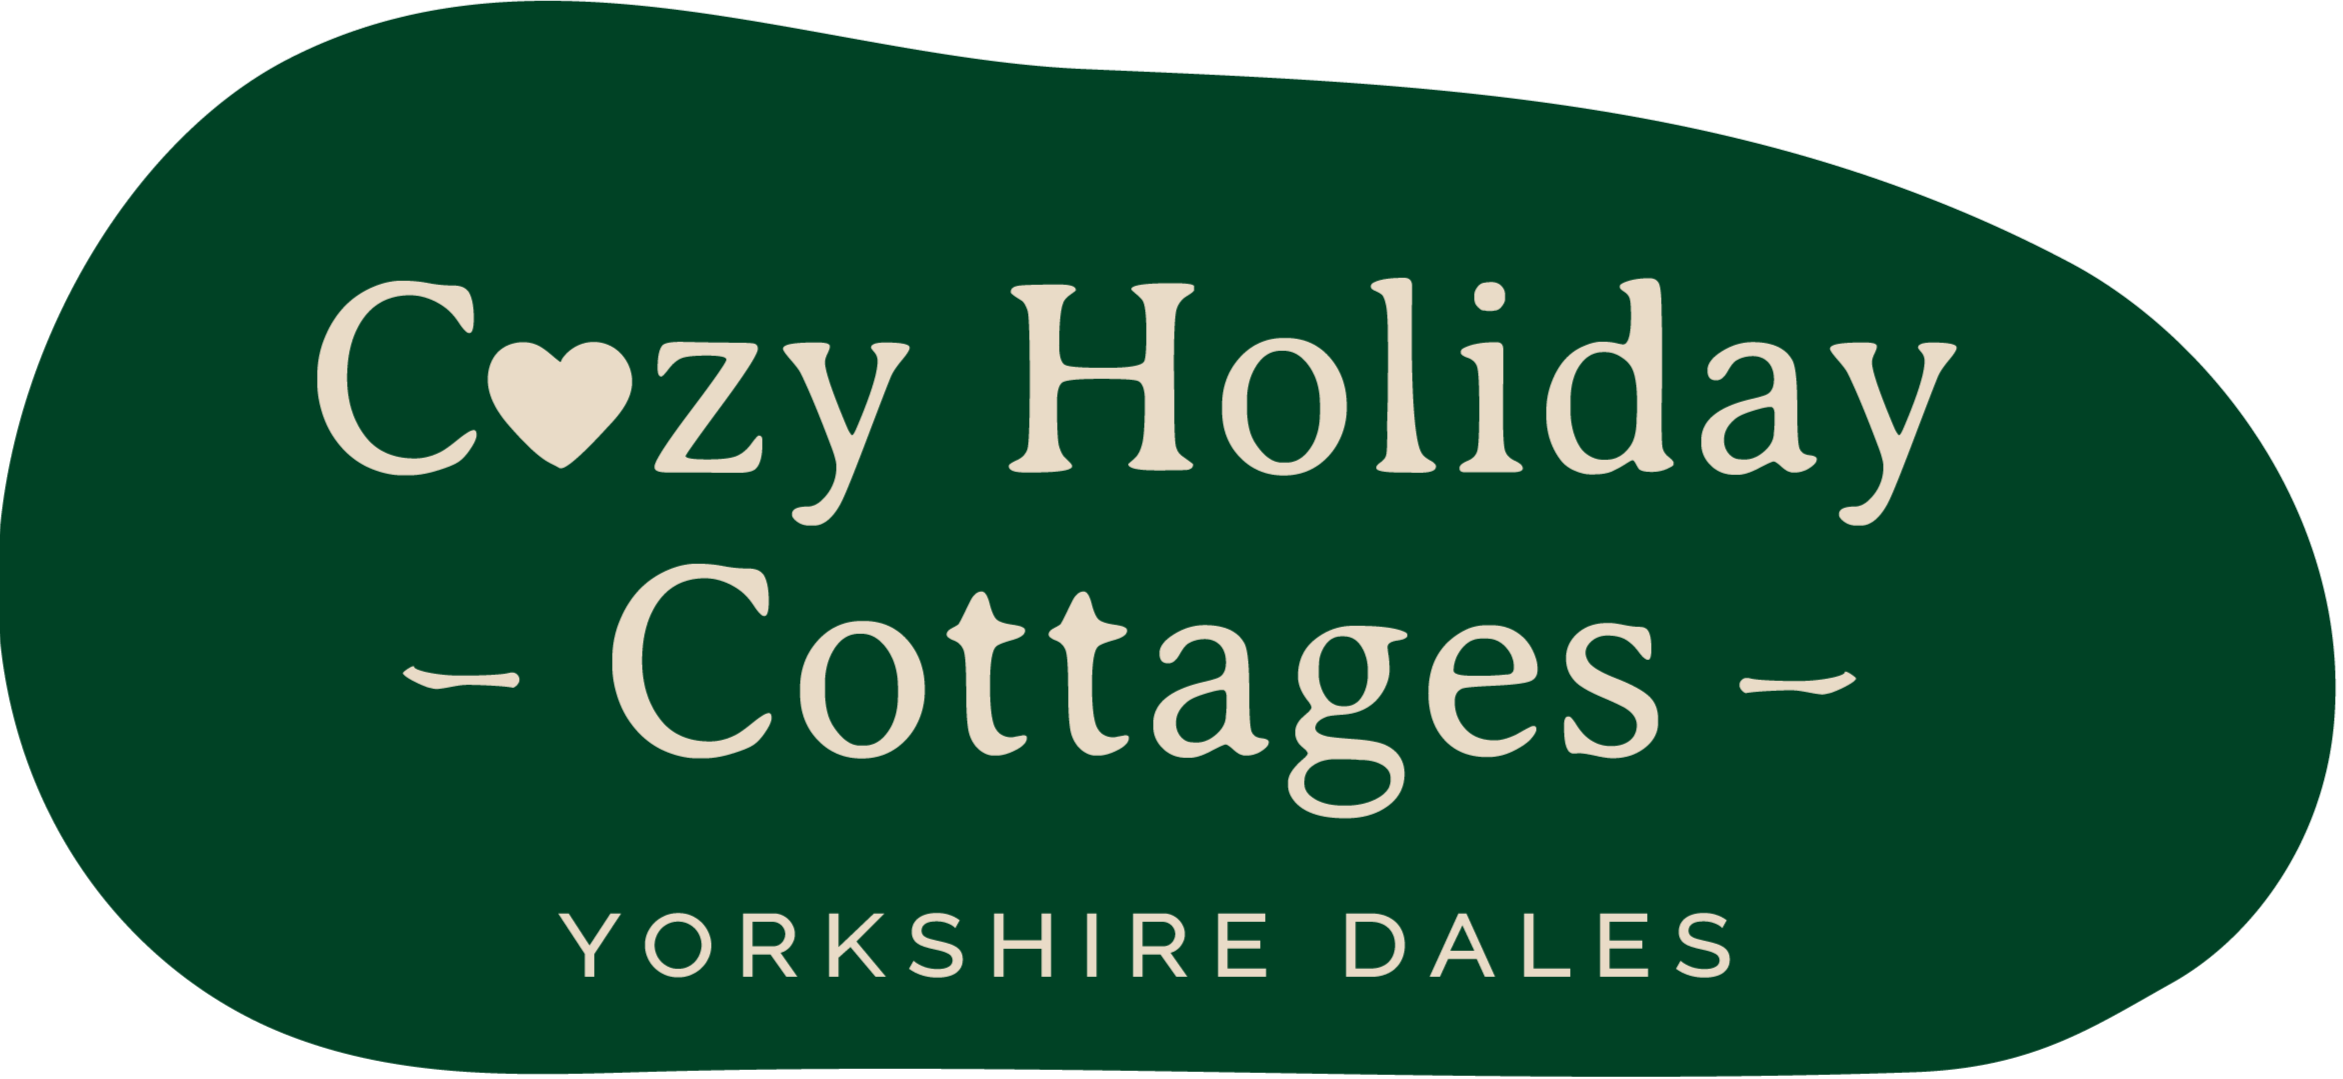 Cozy Holiday Cottages Logo